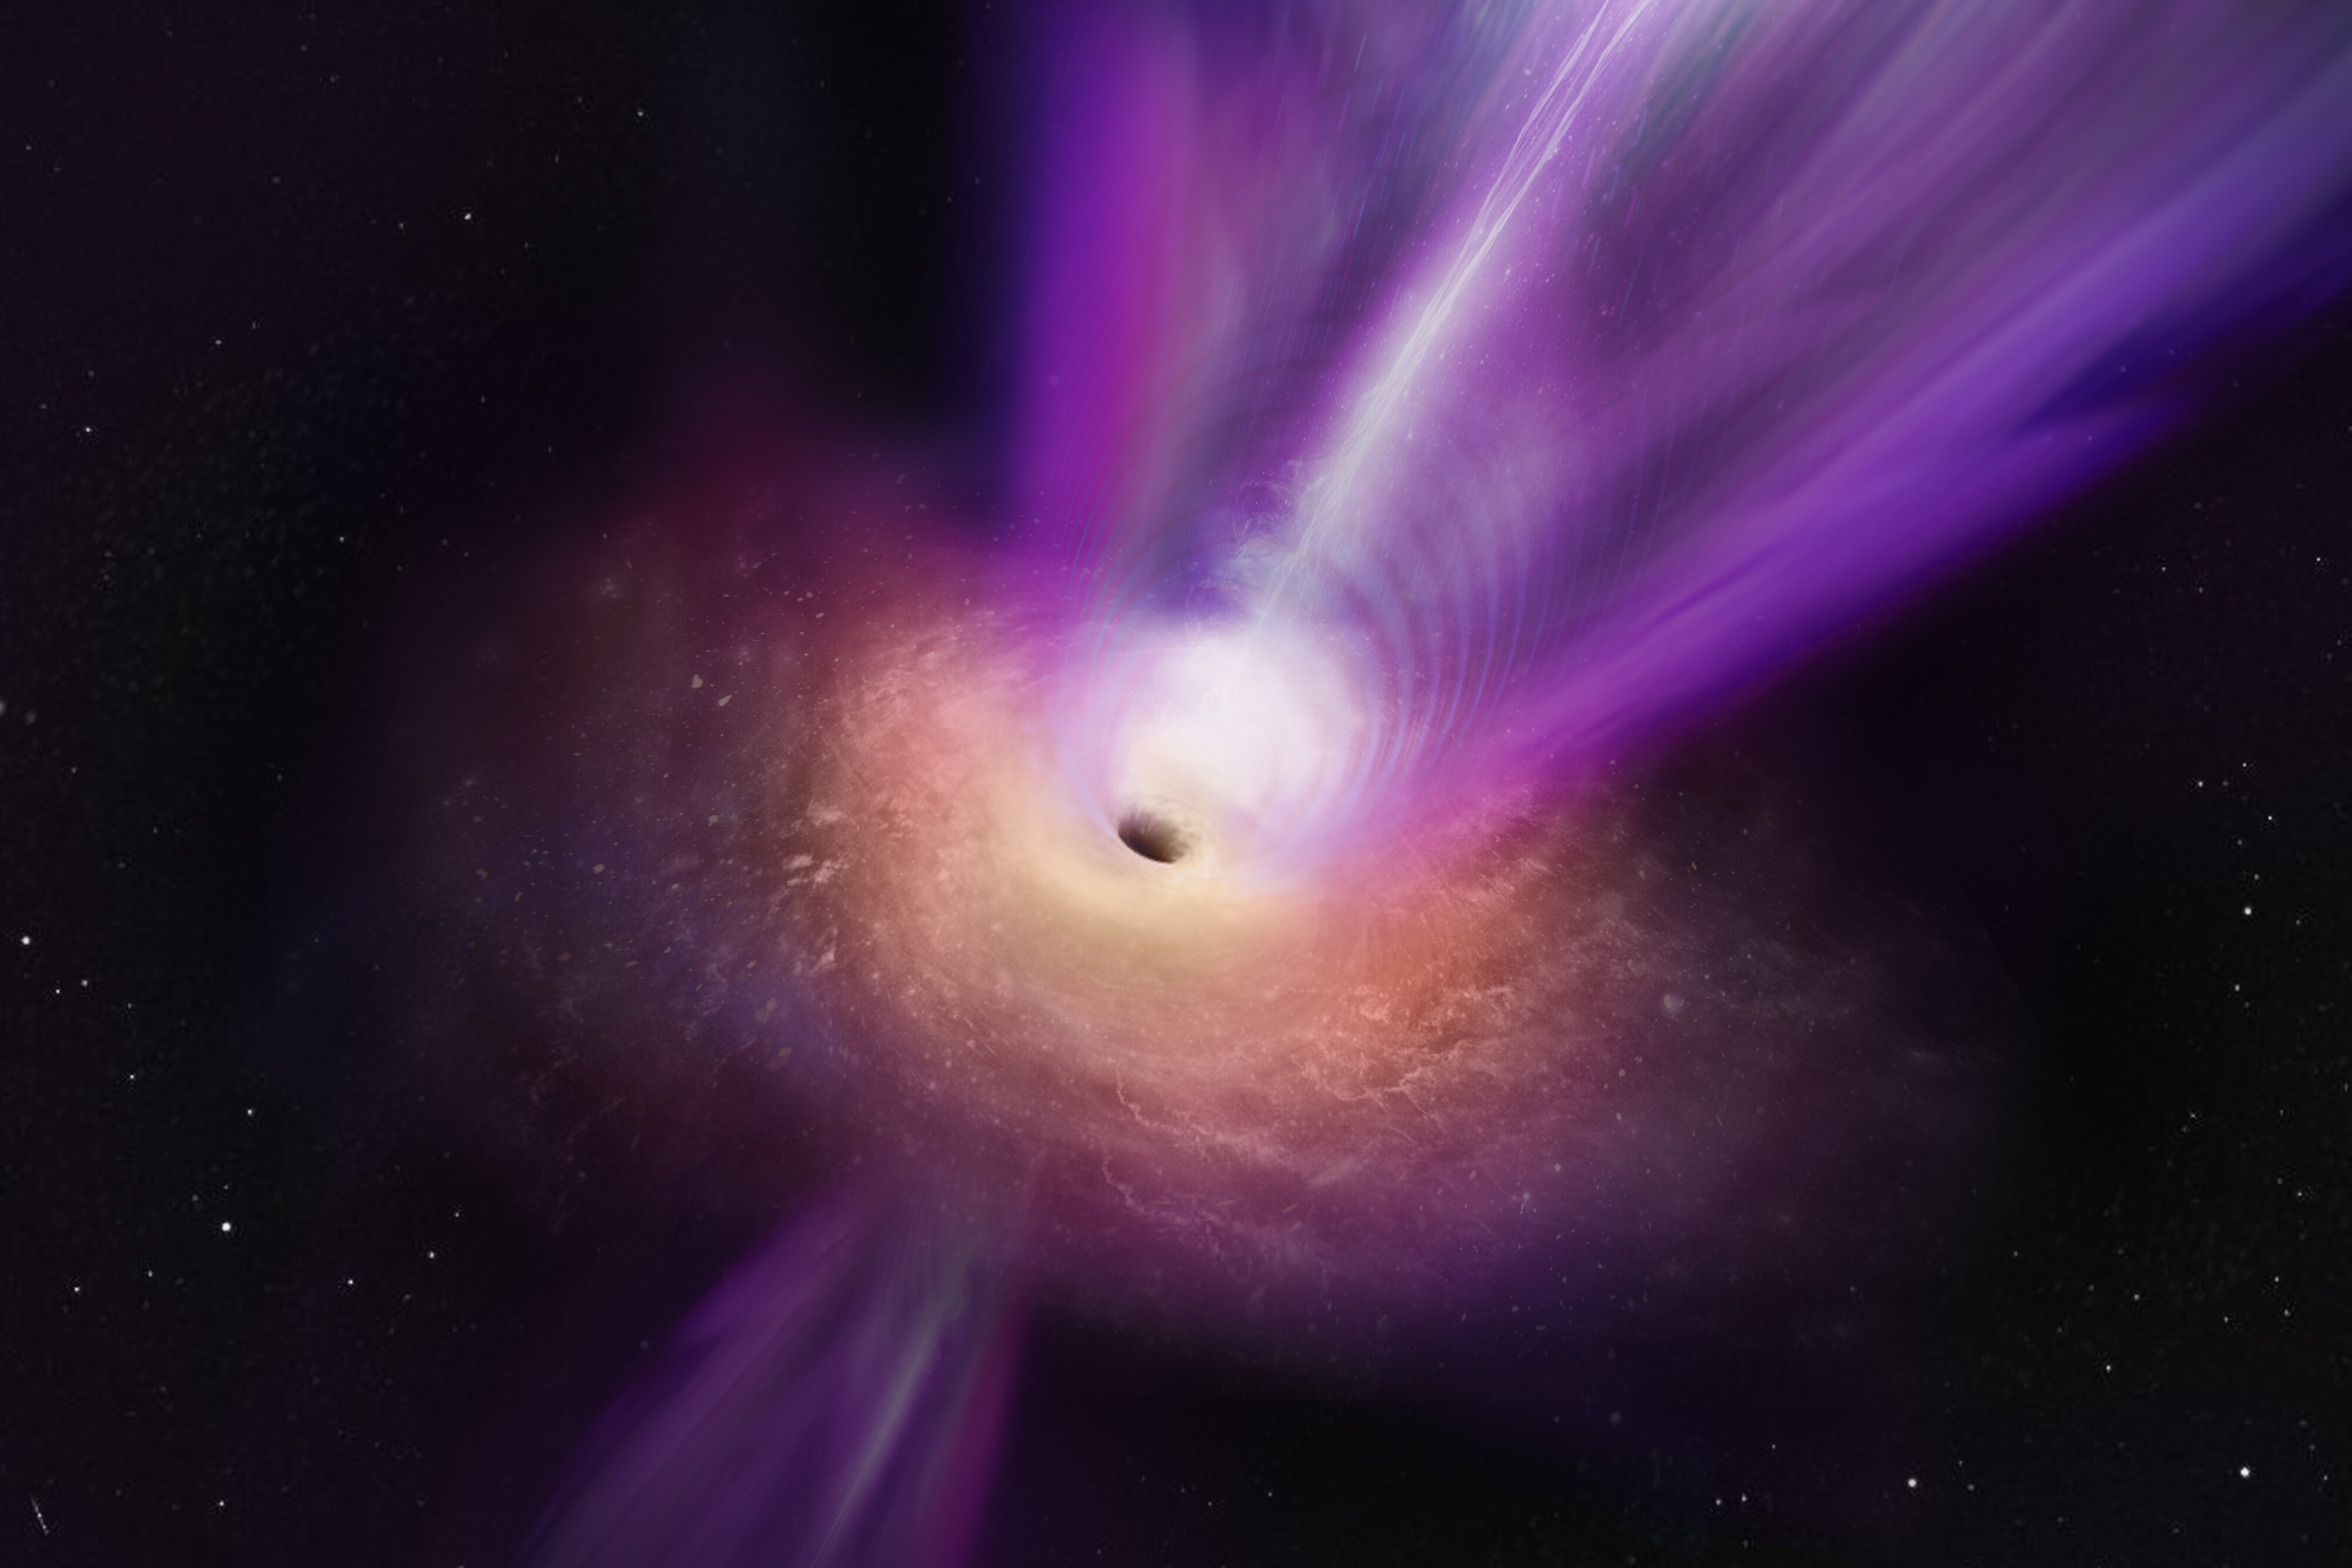 Artist’s impression of the supermassive black hole in the M87 galaxy and its powerful jet.